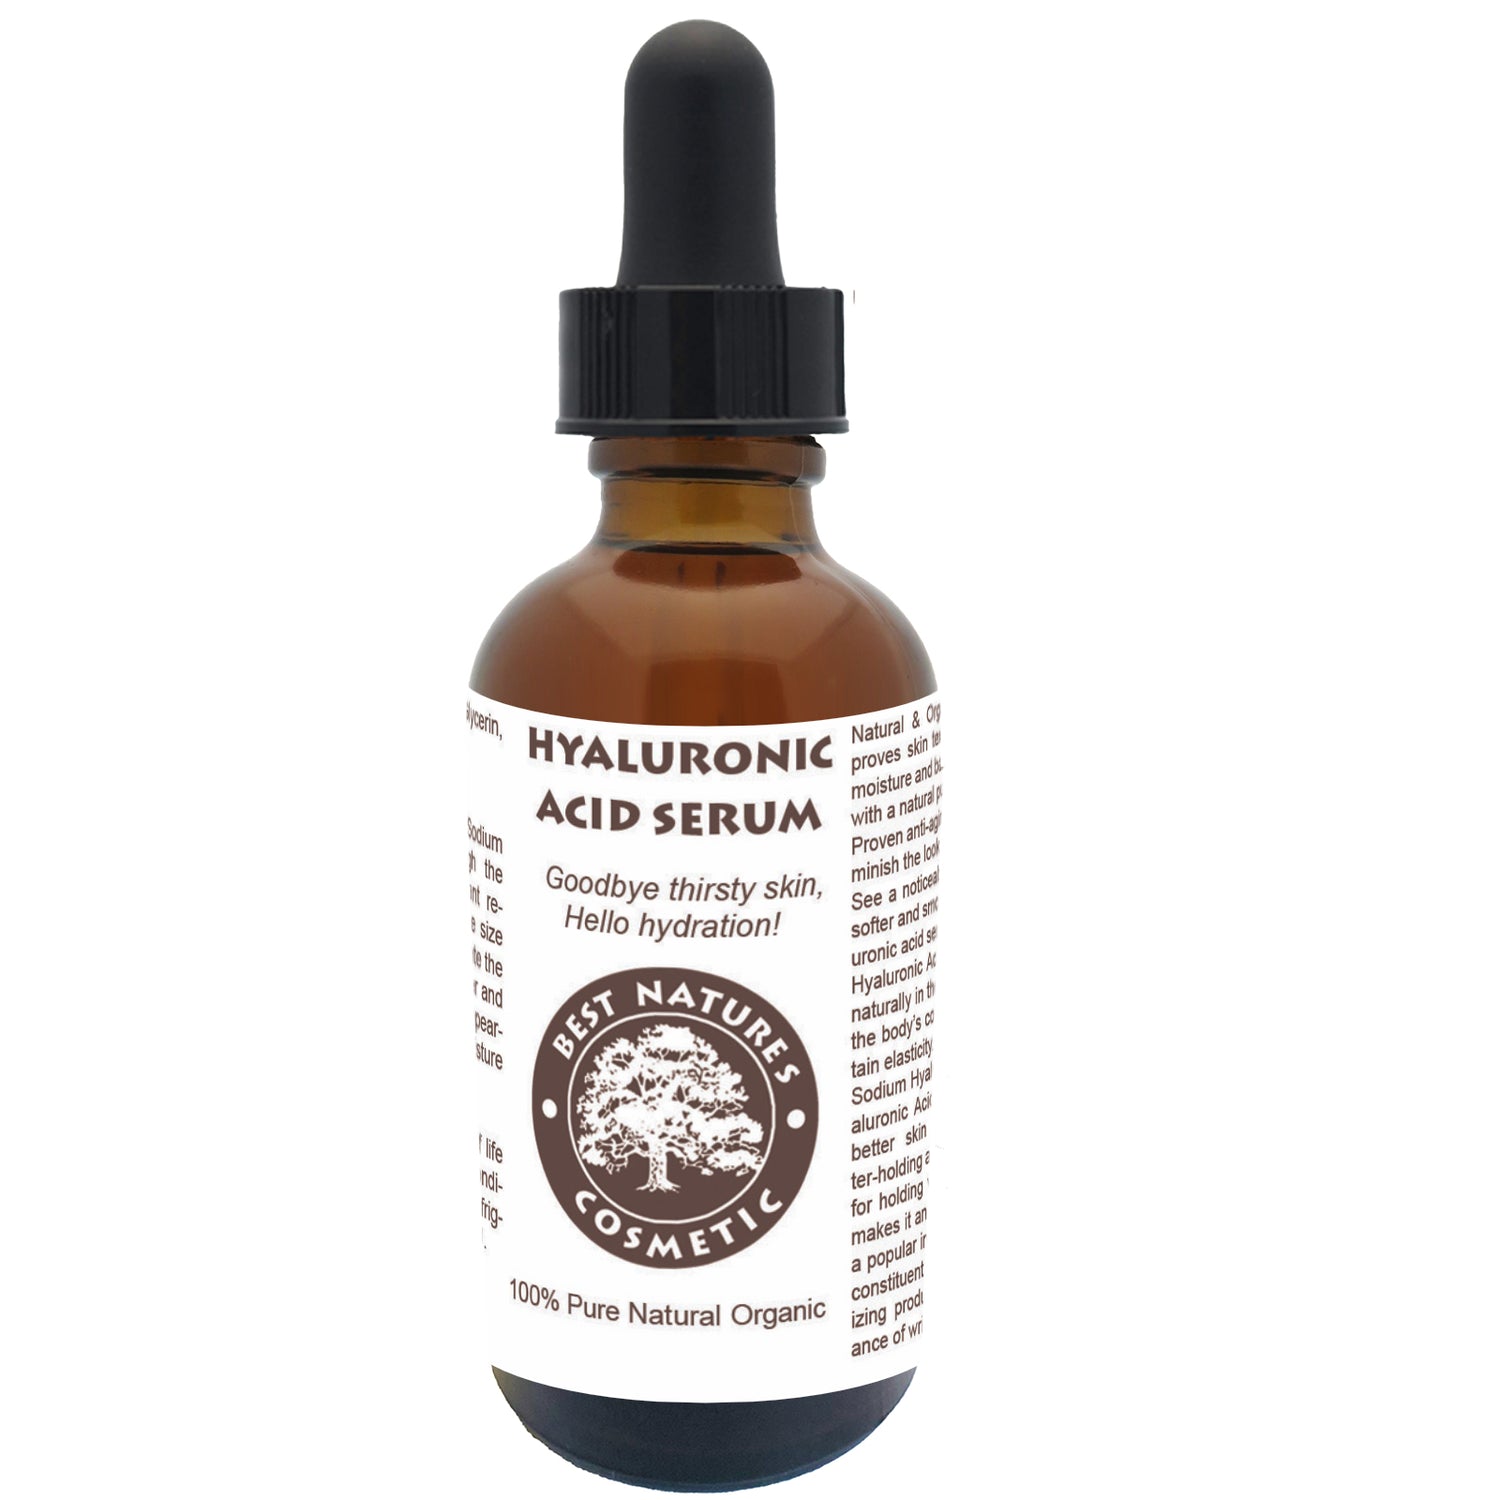 Hyaluronic Acid Serum - improves skin texture, fill-in and diminish the look of fine lines and wrinkles with intense moisture and balance.